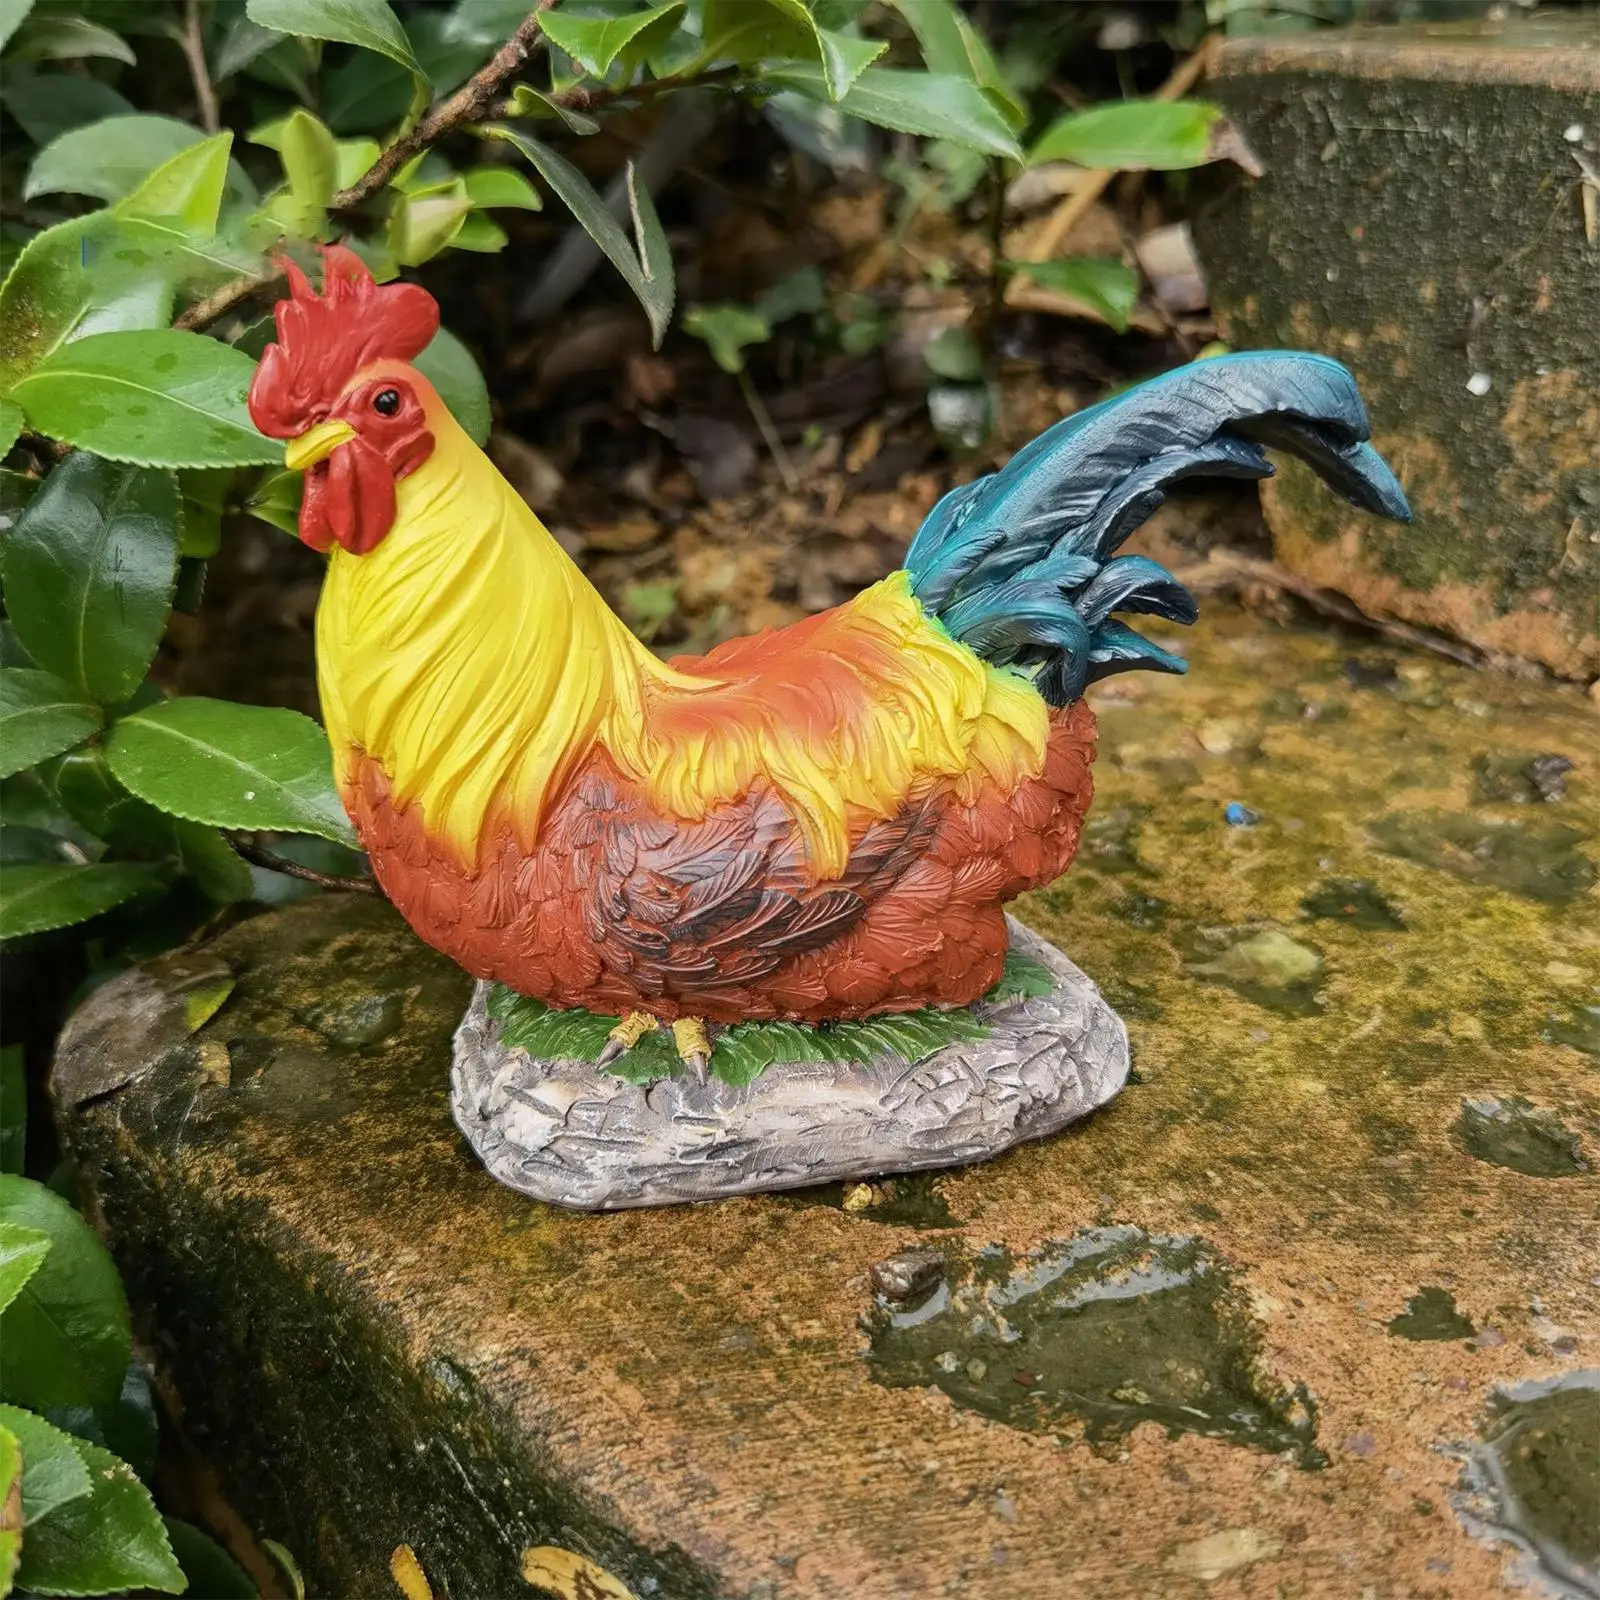 Rooster Statue Artwork Crafts Simulation Rooster Decoration Rooster Ornament Chicken Statue for Backyard Yard Lawn Patio Home